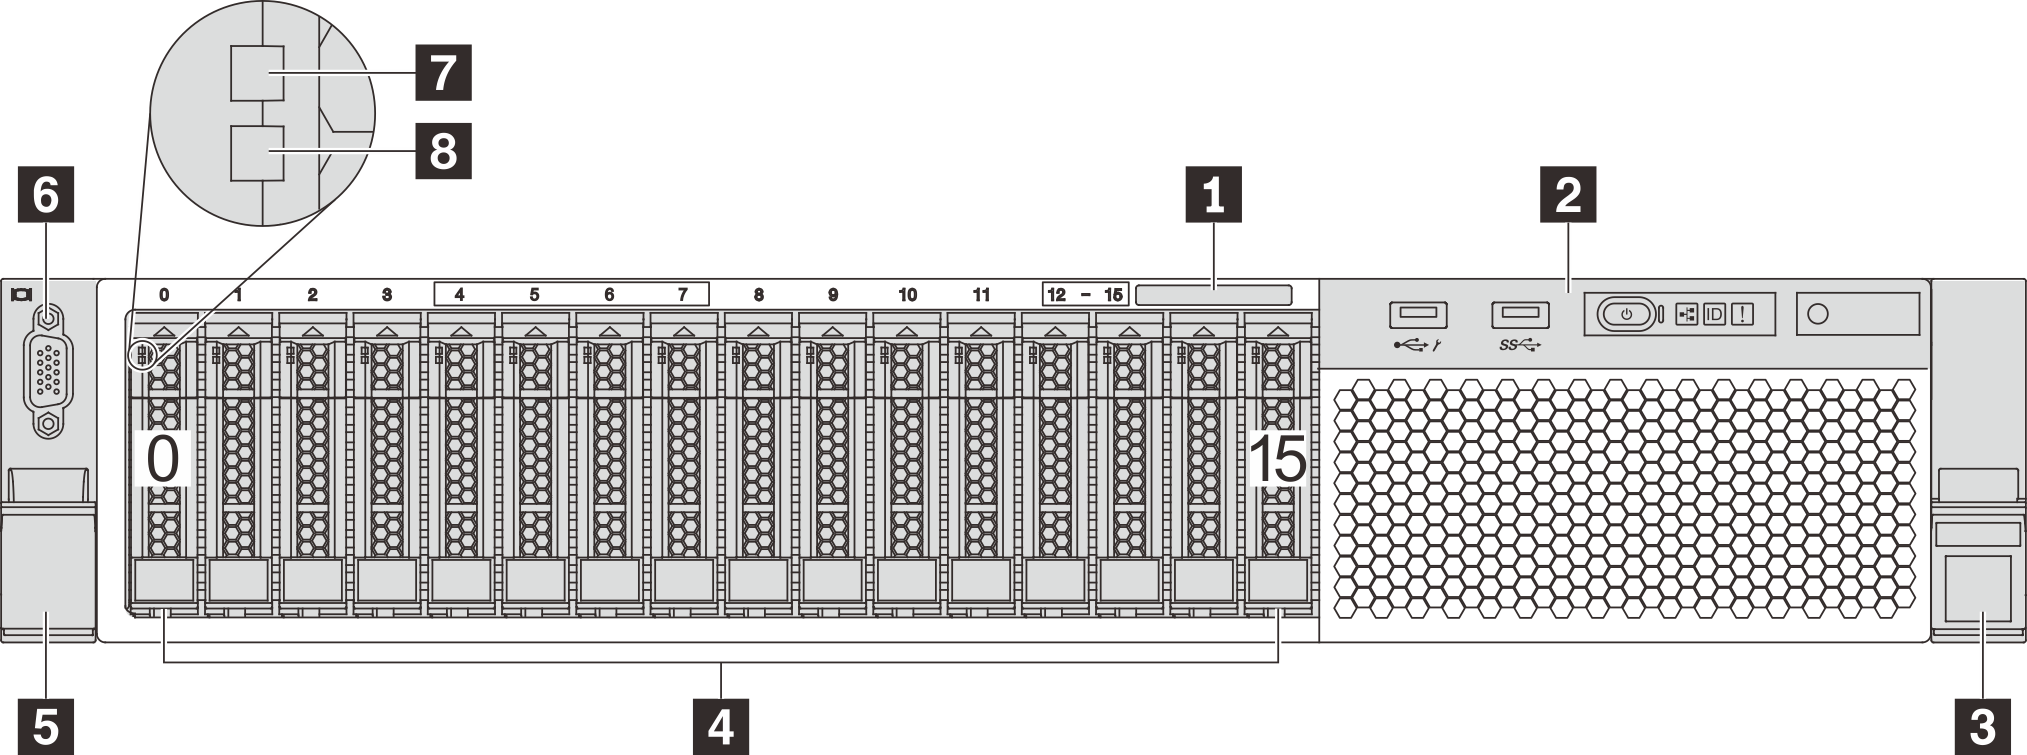 Front view of server models with sixteen 2.5-inch drive bays (0–15)